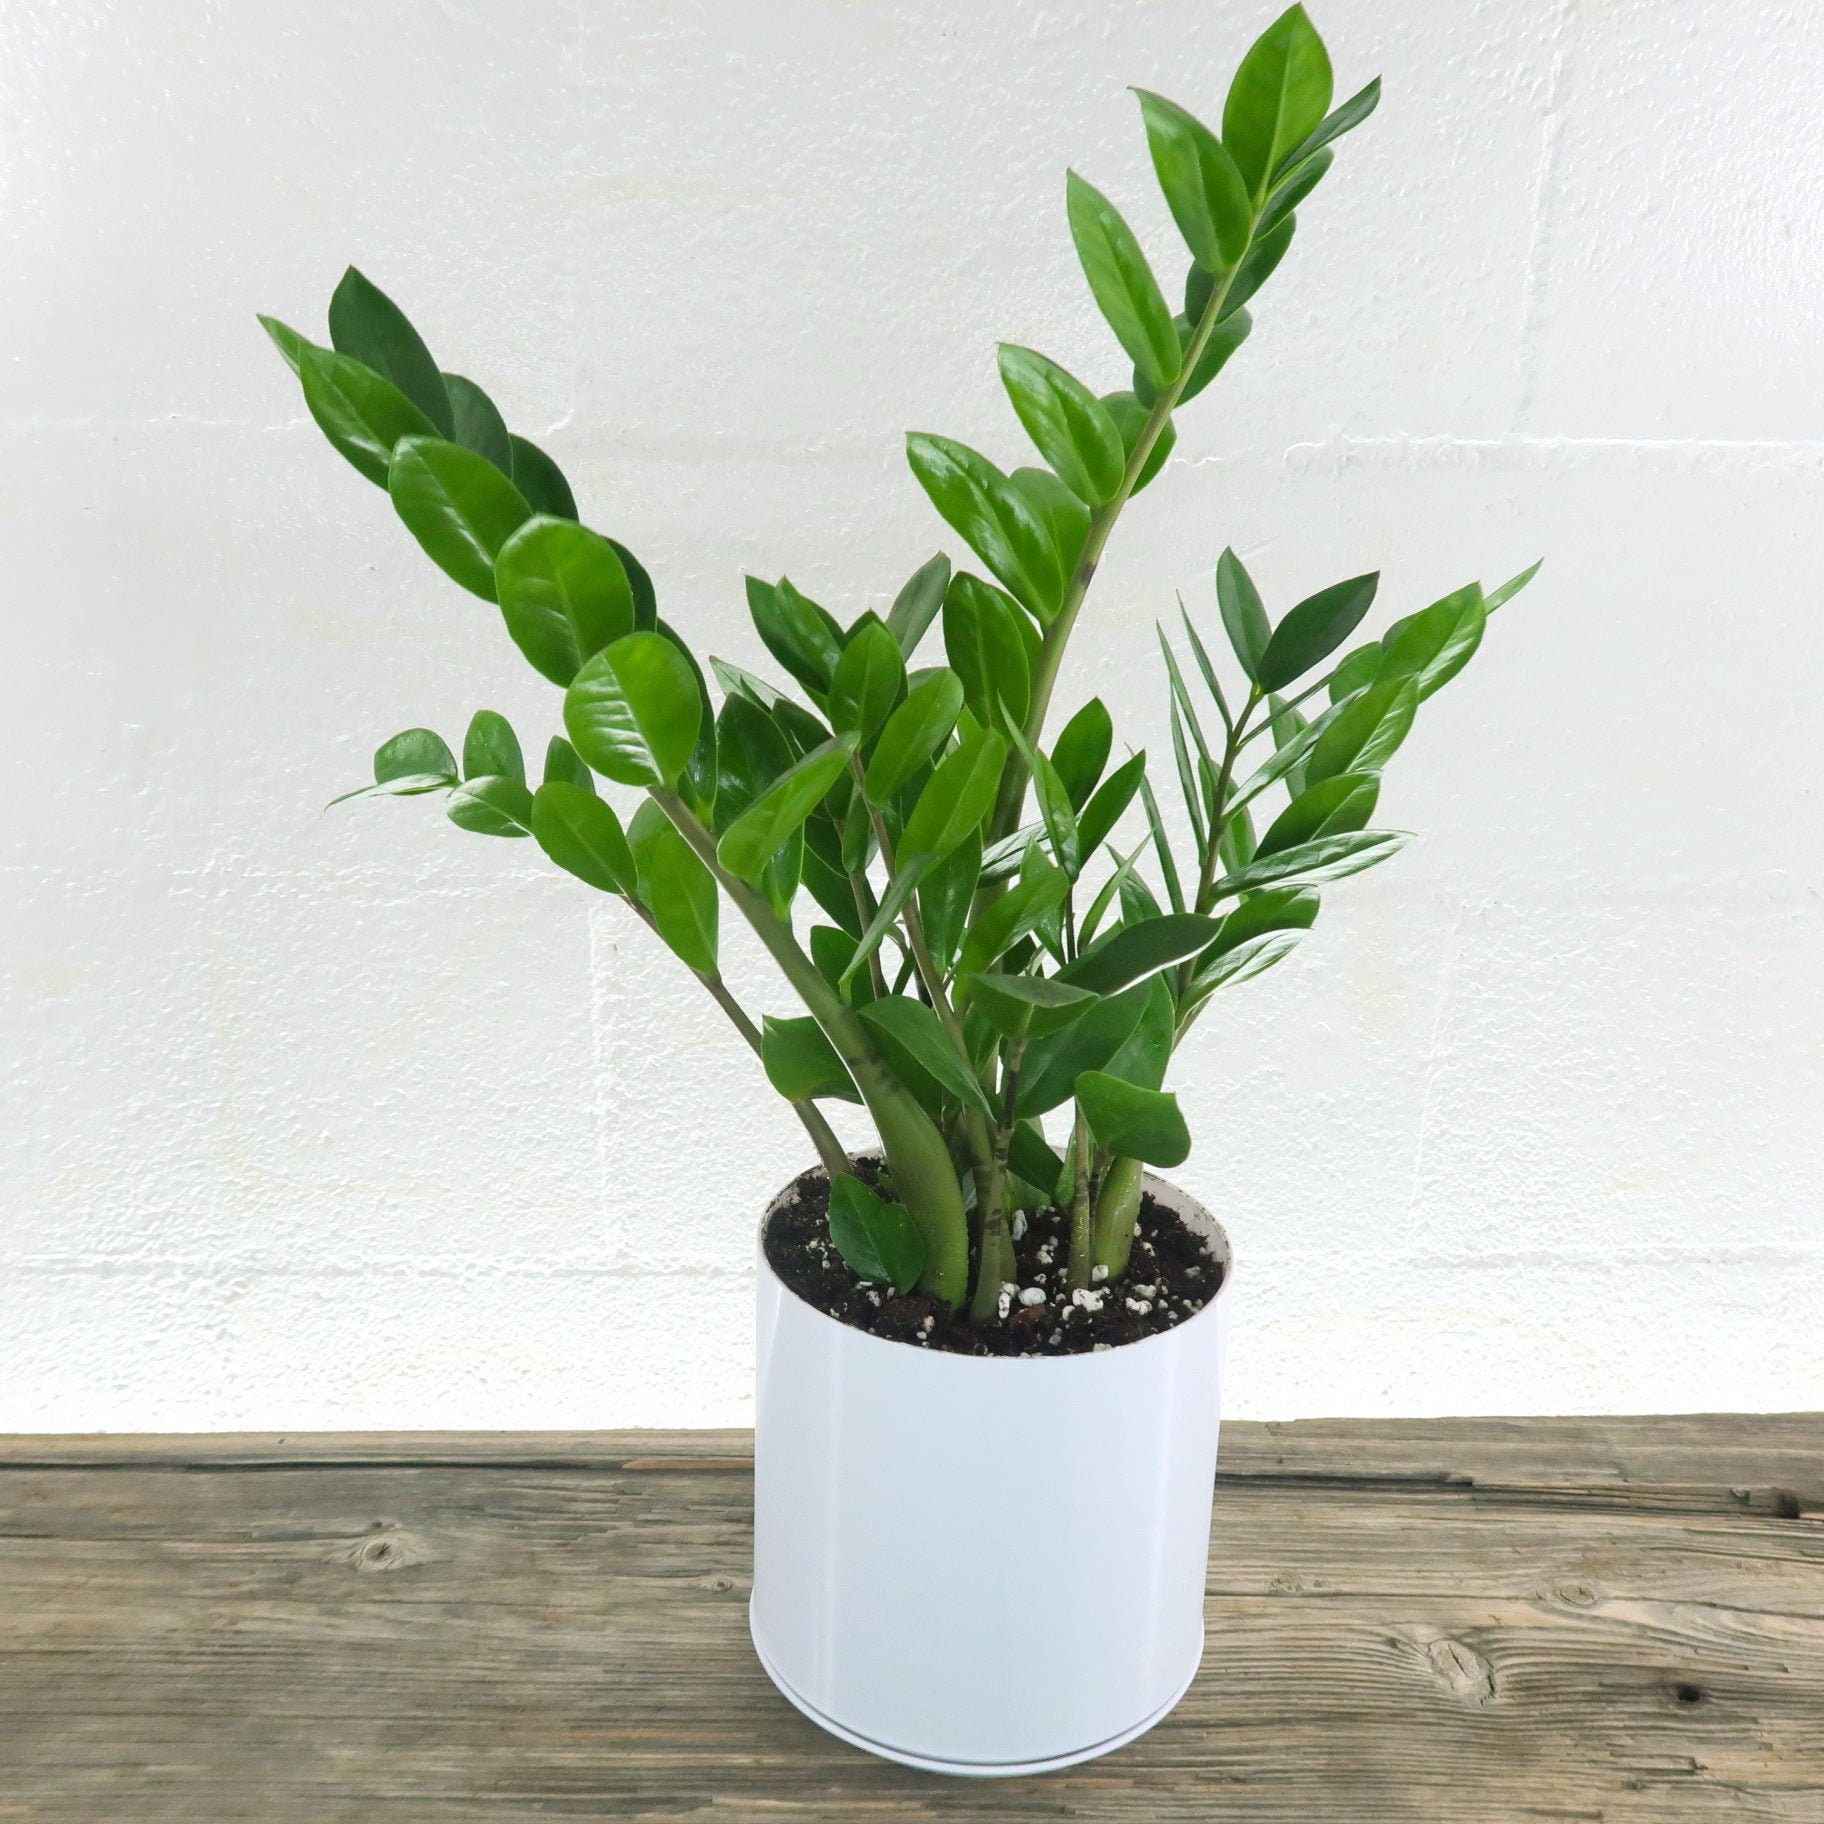 Large ZZ Plant Zamioculcas Zamiifolia Live House Plant   Super Easy Care  Indoor Plant, White Planter, Gardening, Office, Home, Present